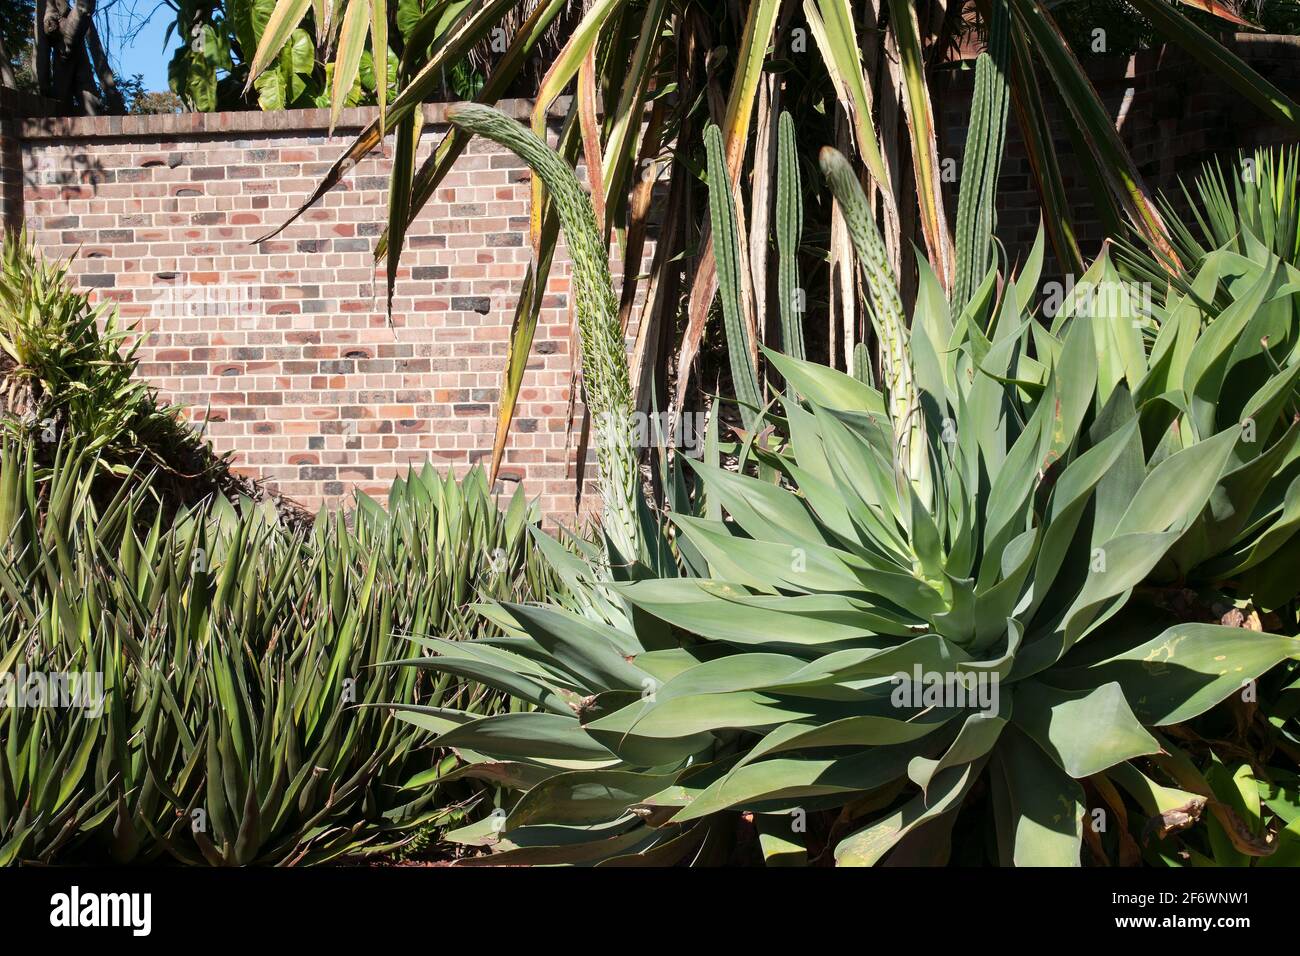 Sydney Australia, two Swan's Neck agave with emerging flower stems in garden Stock Photo